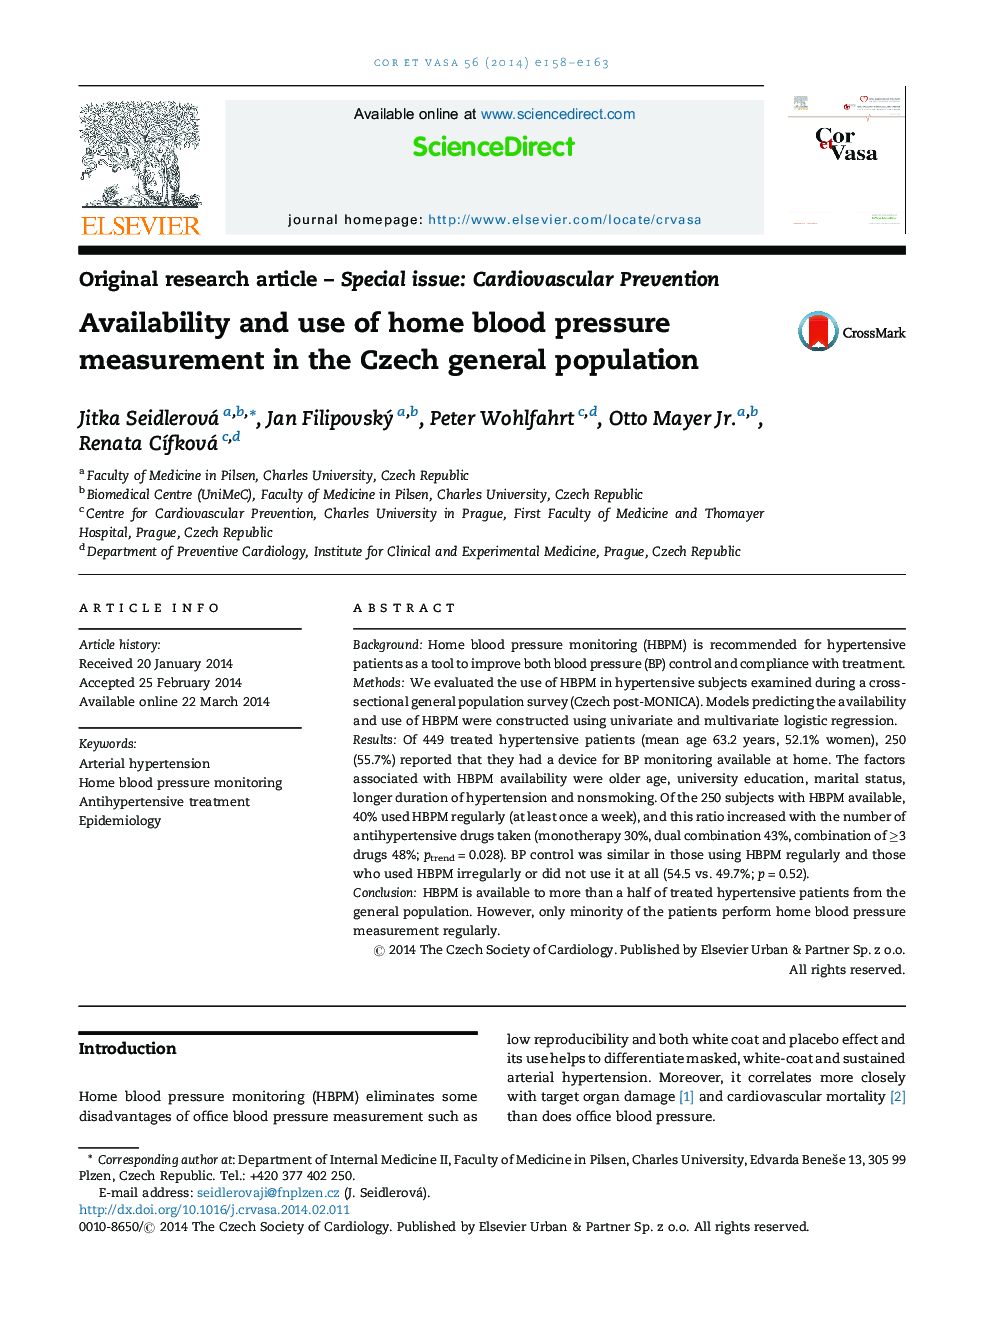 Availability and use of home blood pressure measurement in the Czech general population